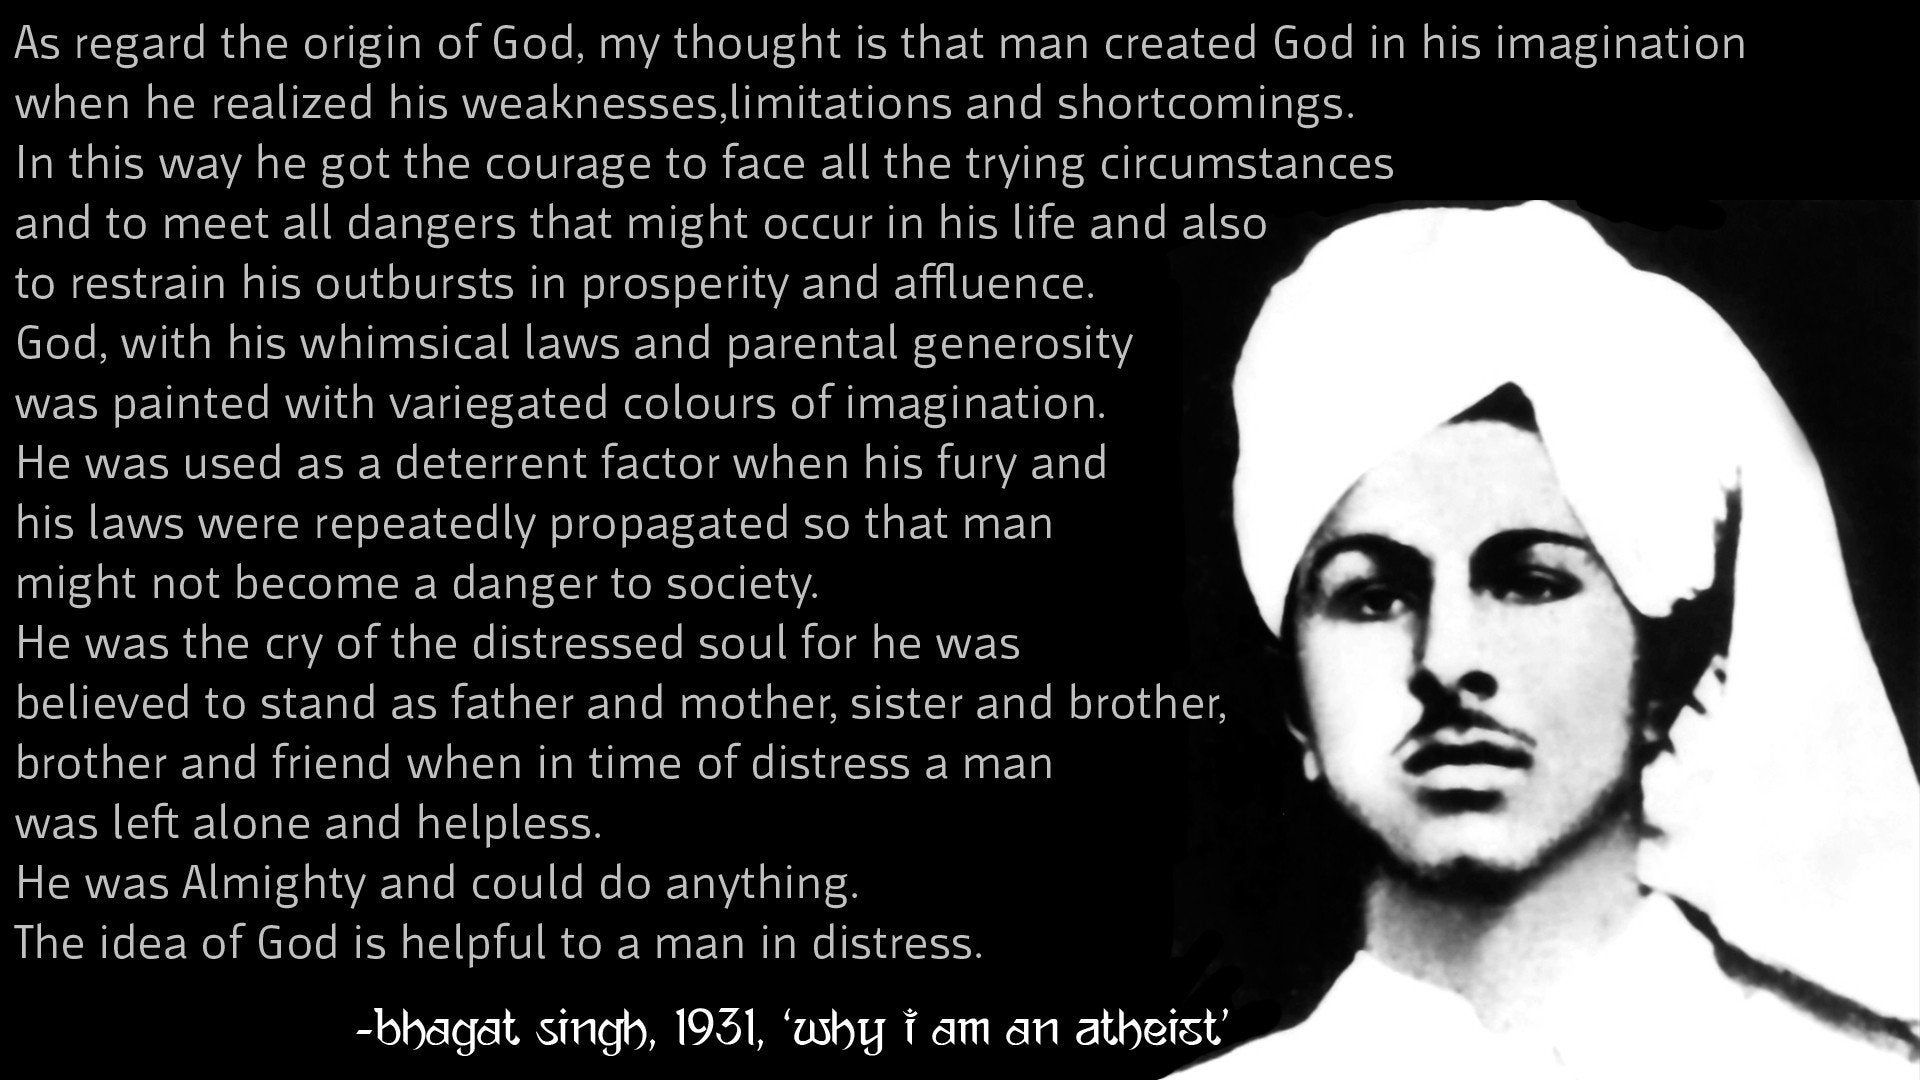 God defined by India's great freedom fighter Bhagat singh